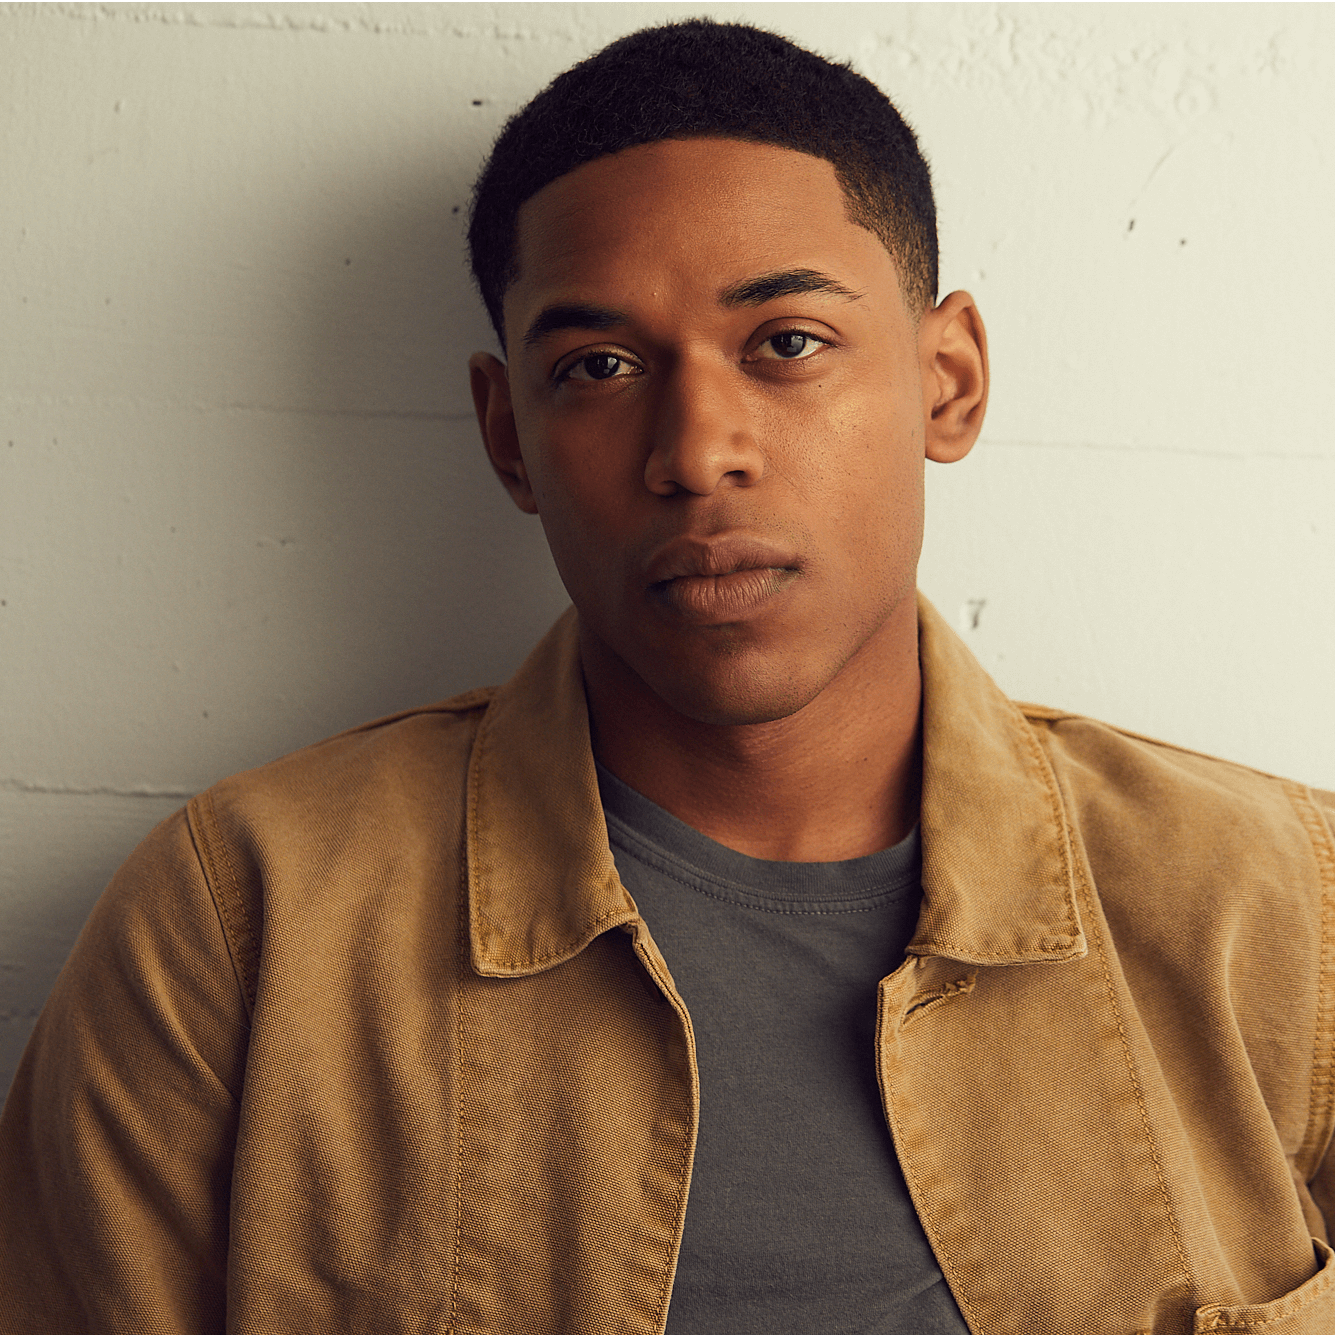 Image is a headshot of Kelvin Harrison Jr, an actor for the movie Cyrano